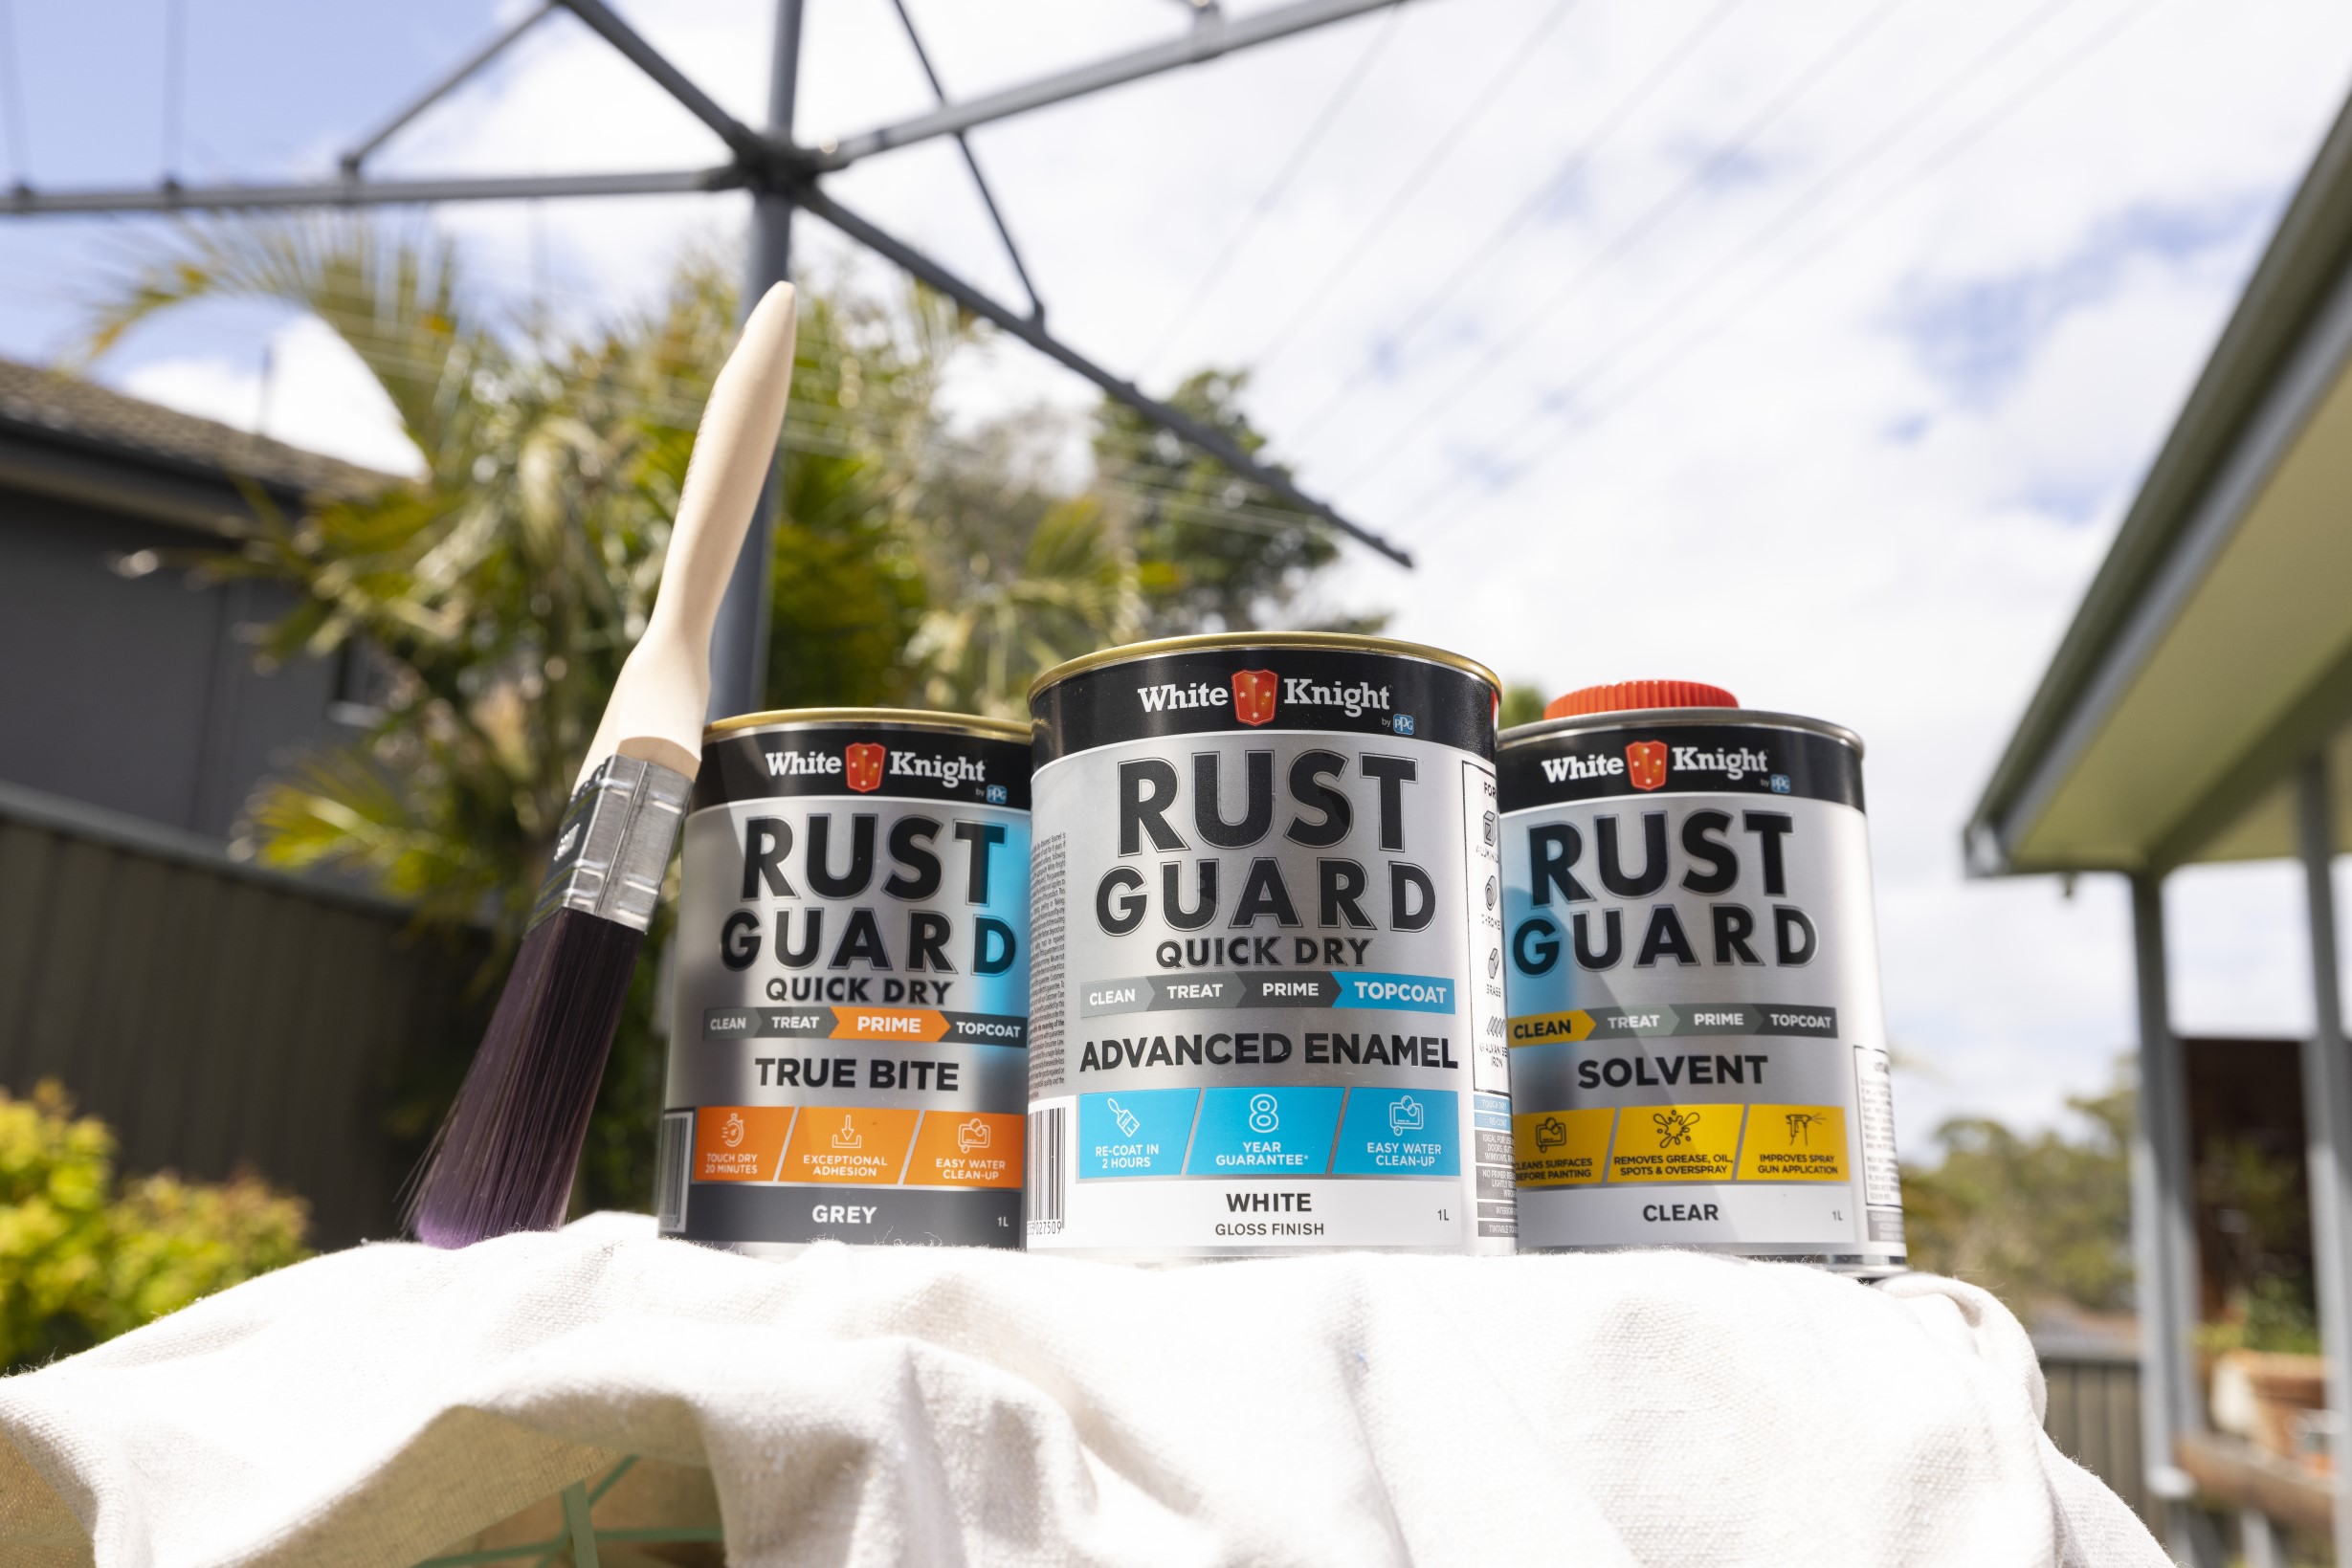 Giving the backyard clothesline a second life with Rust Guard